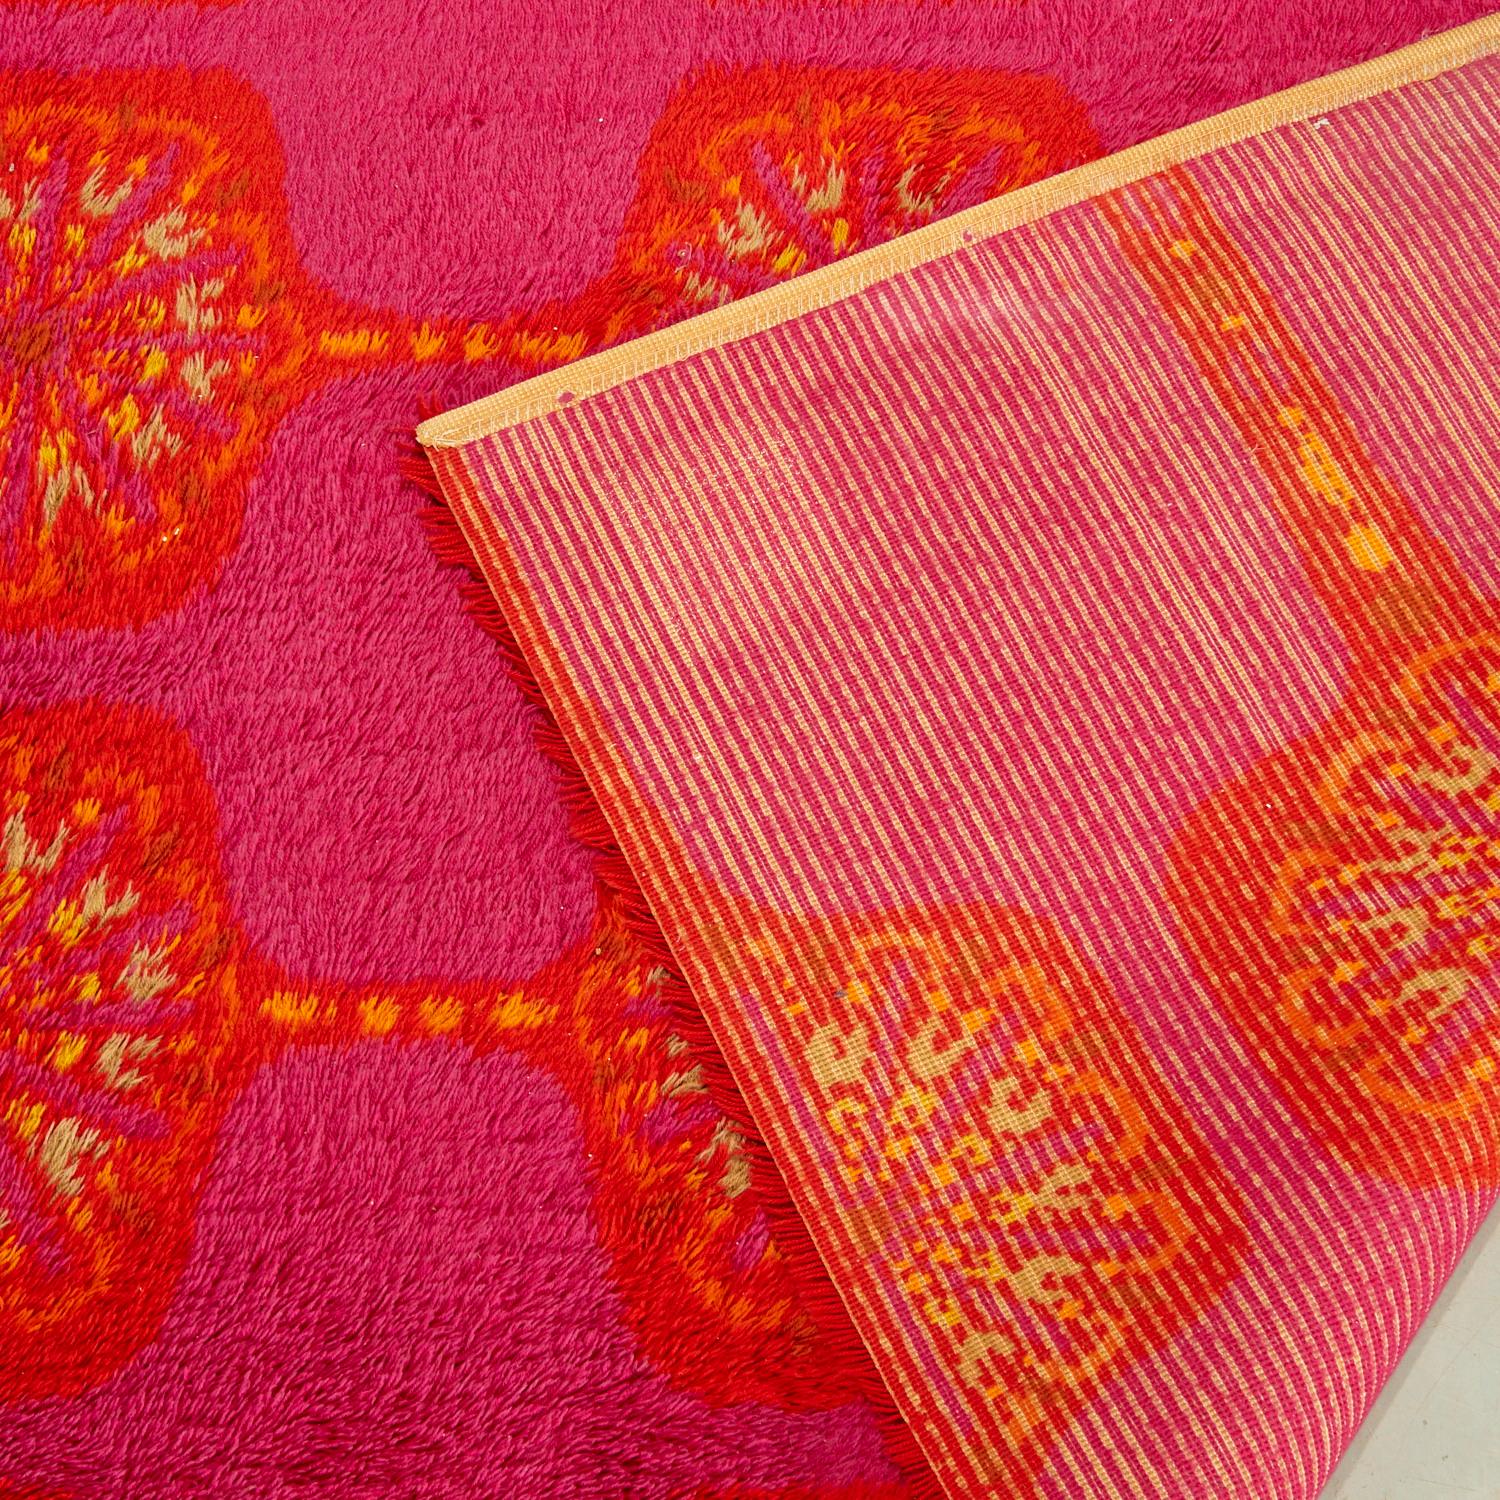 Woven Modernist Rya Shag Carpet, Stylized Red and Orange Florals on a Fuchsia Ground For Sale